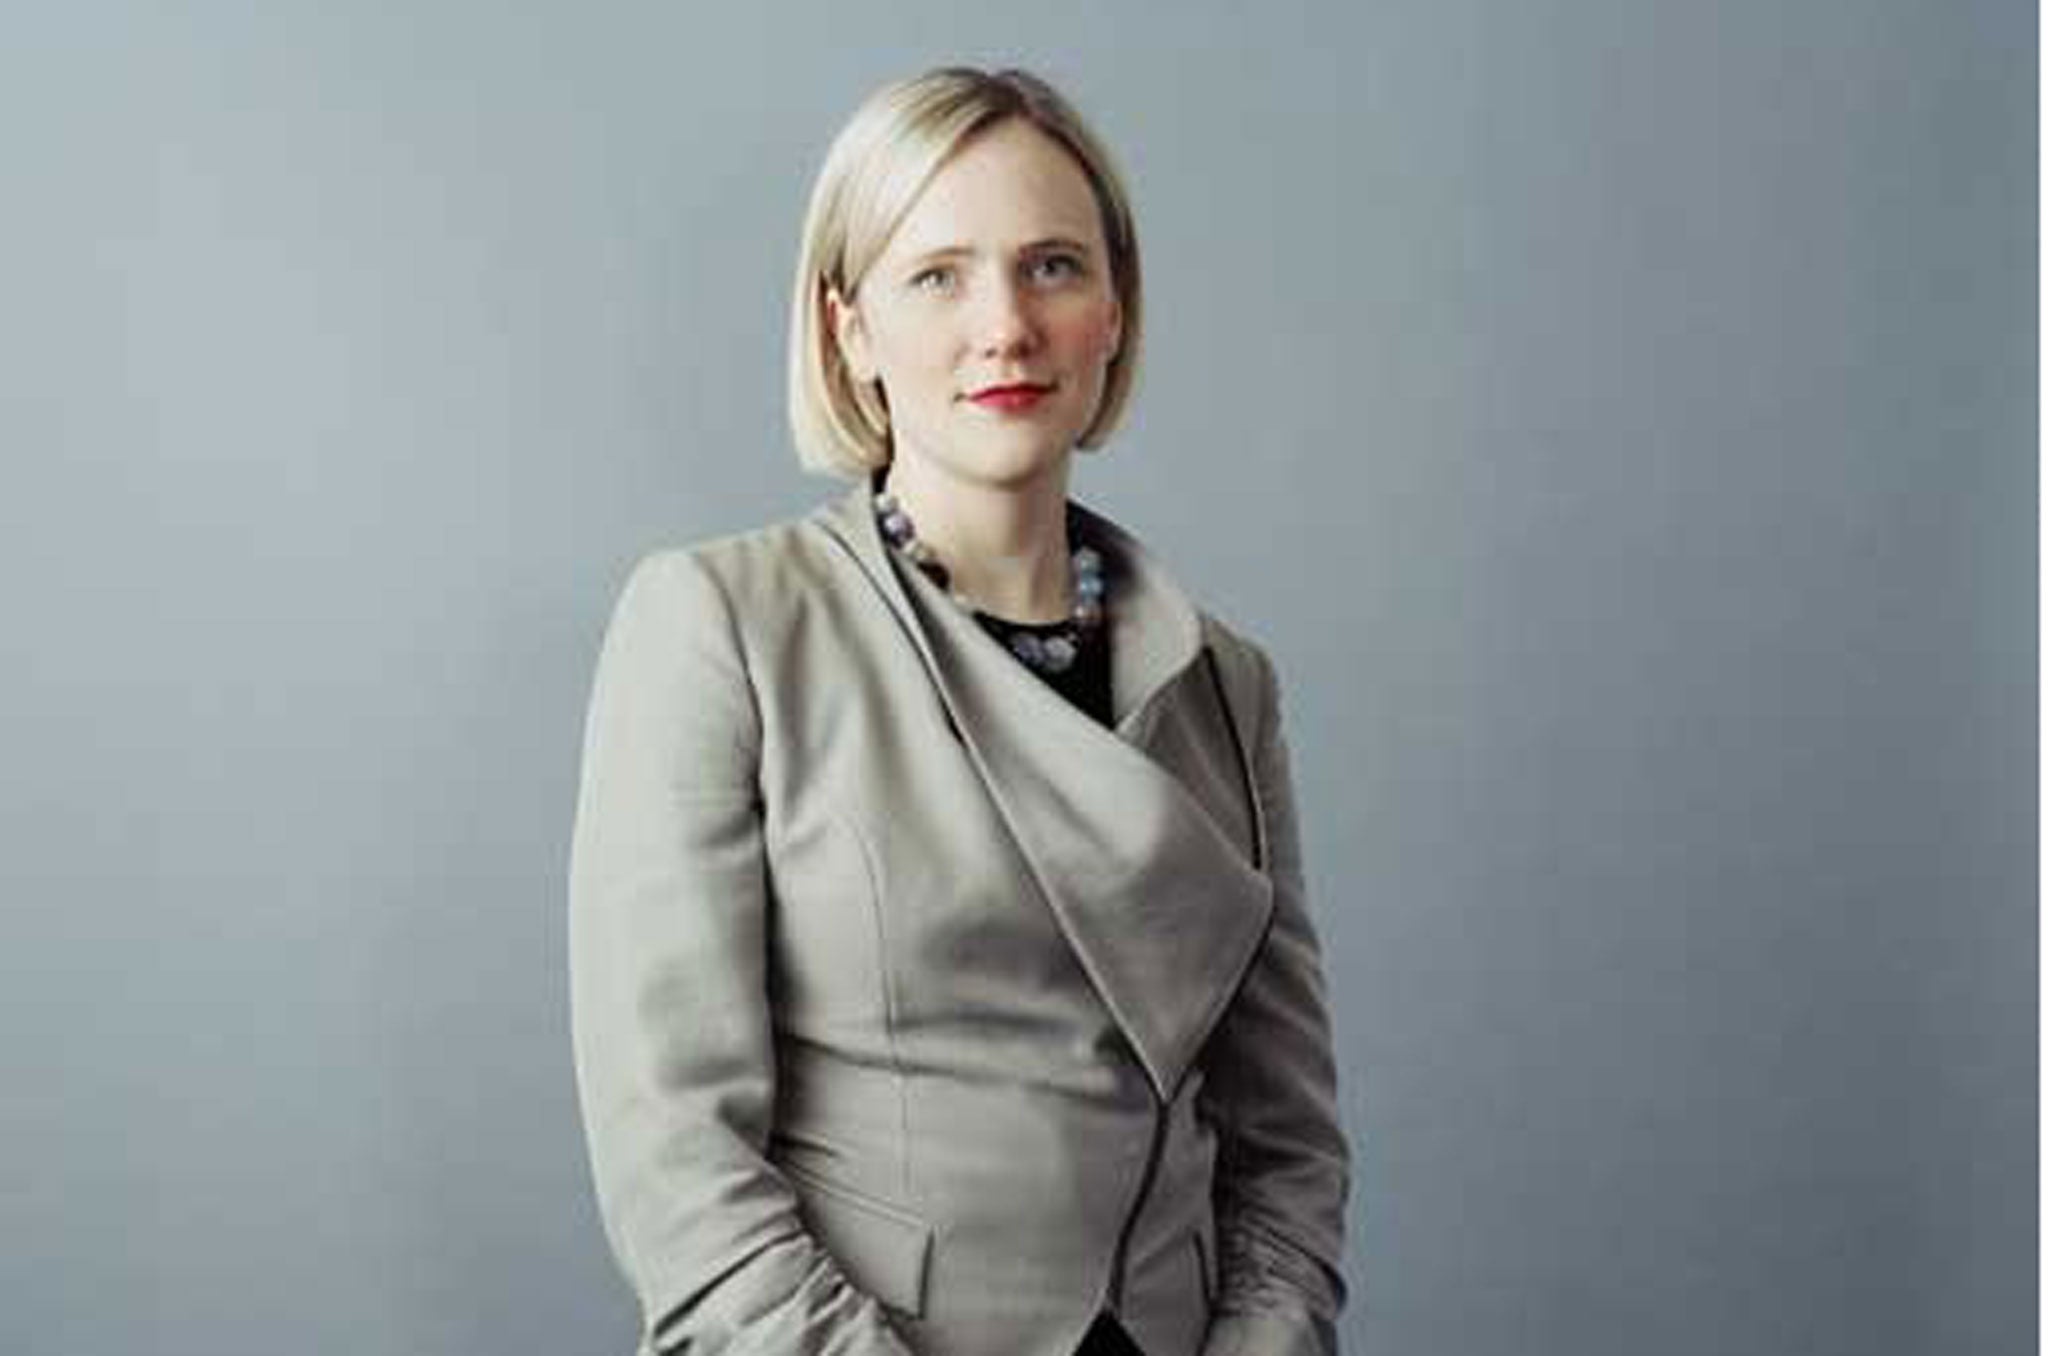 ‘This is our moment for change,’ says Stella Creasy